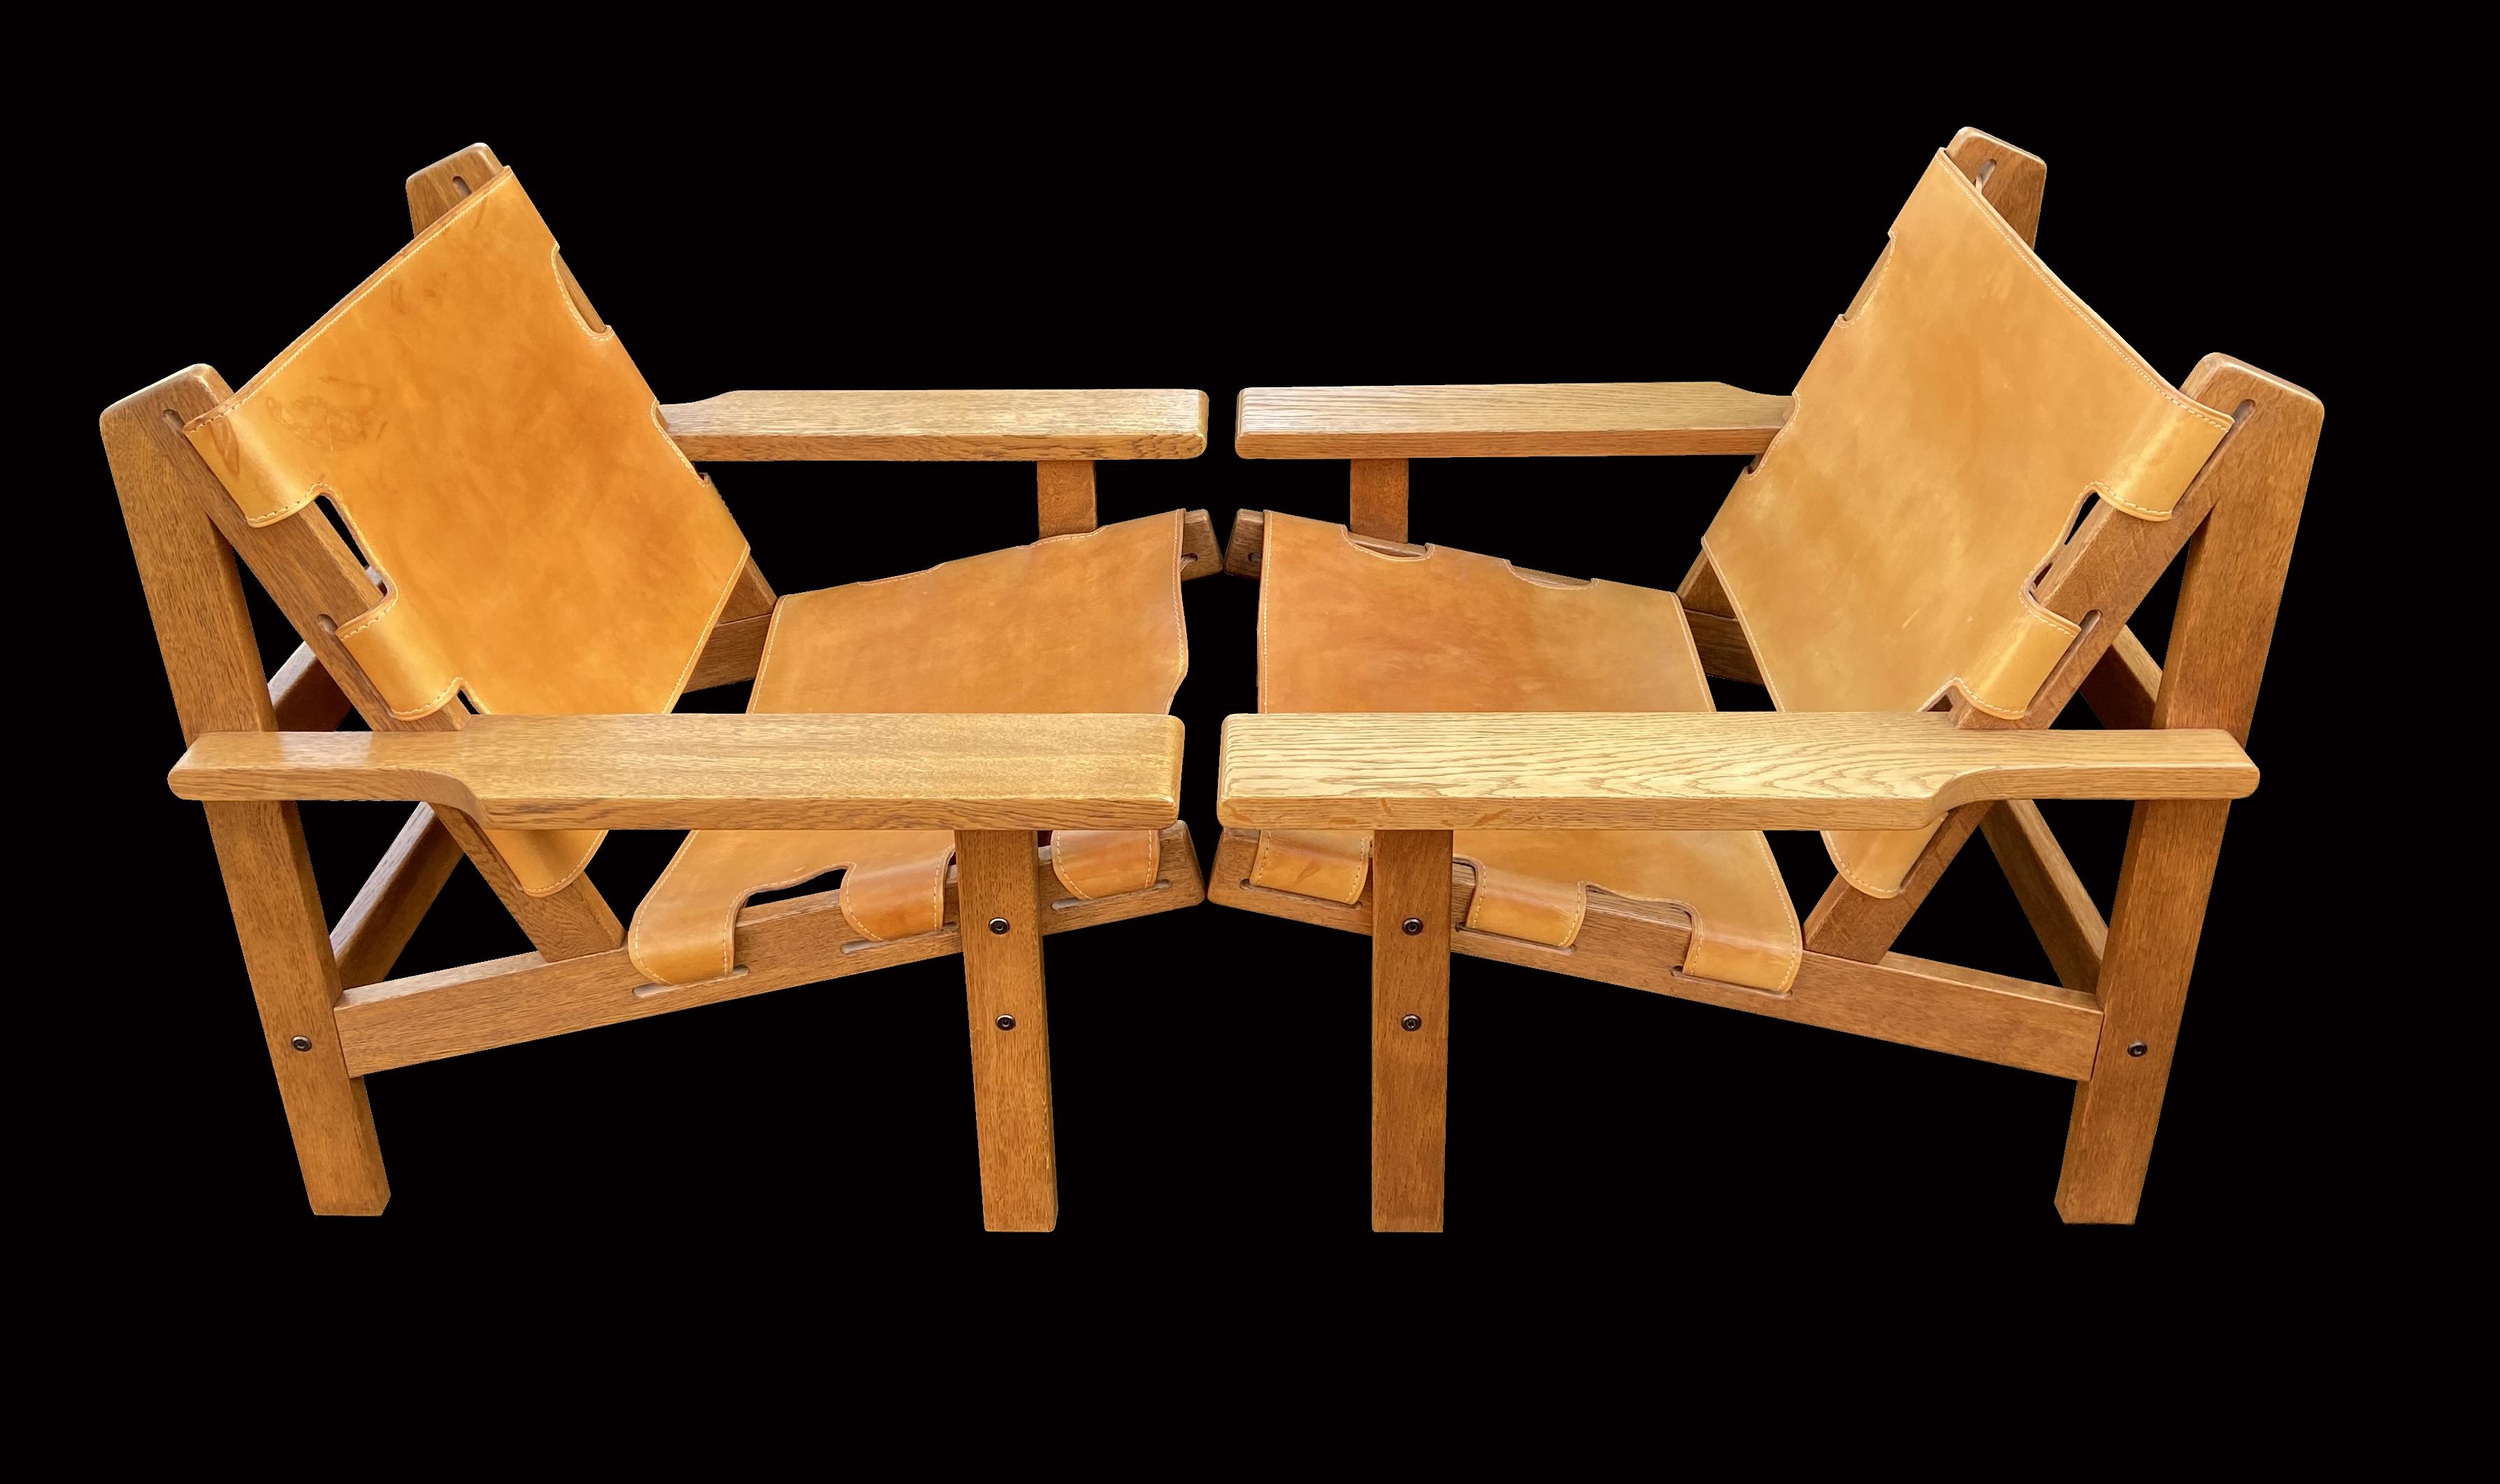 A very fine pair of these scarce chairs by Kurt Ostervig, Very much in the same vein as Borge Mogensen Spanish Chairs, in solid Oak and Cognac saddle leather.